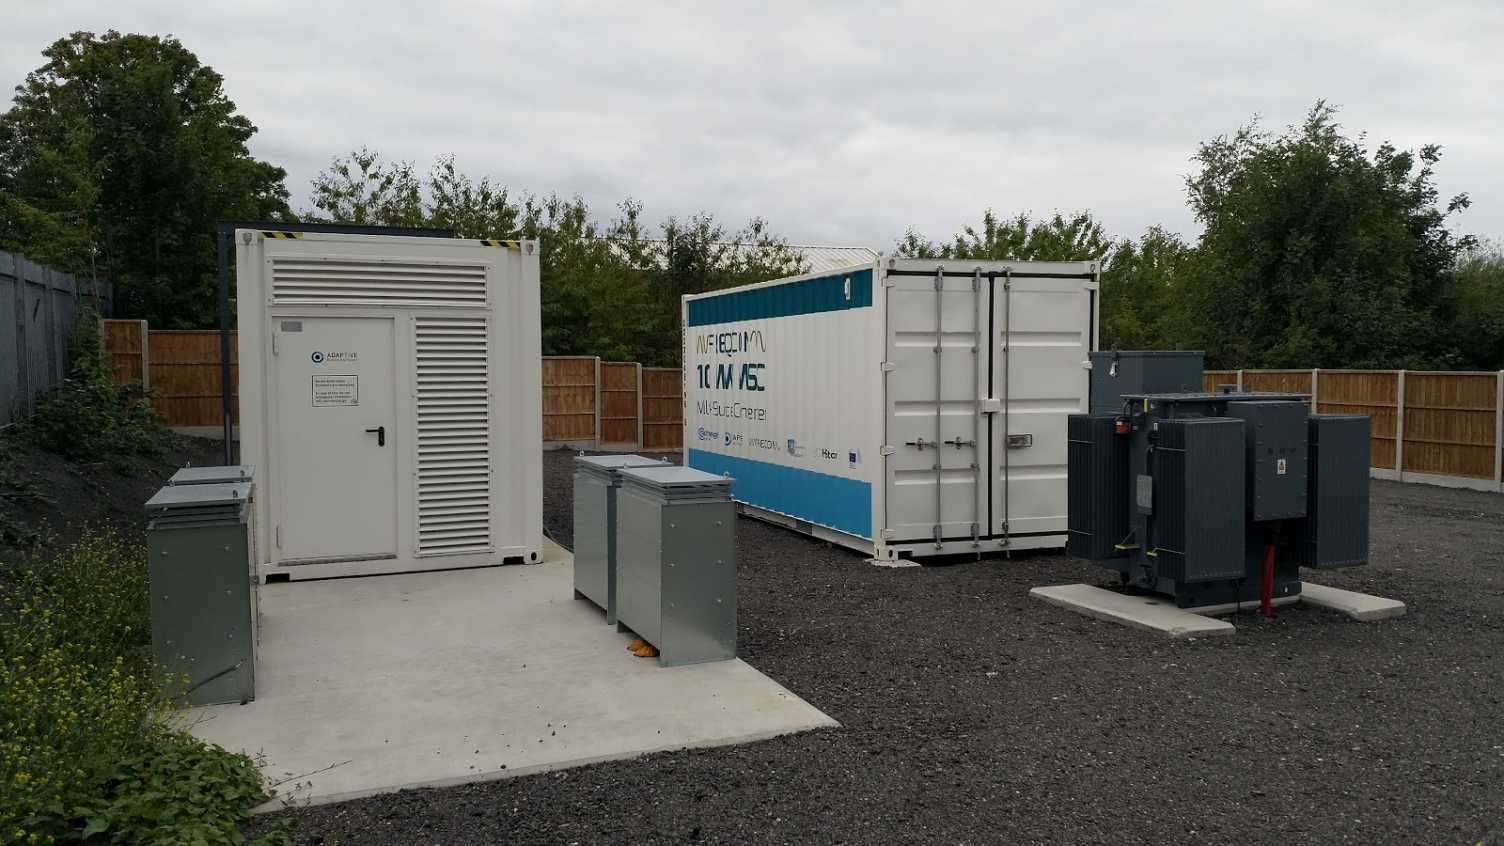 Successful flywheel installation takes energy storage project to next